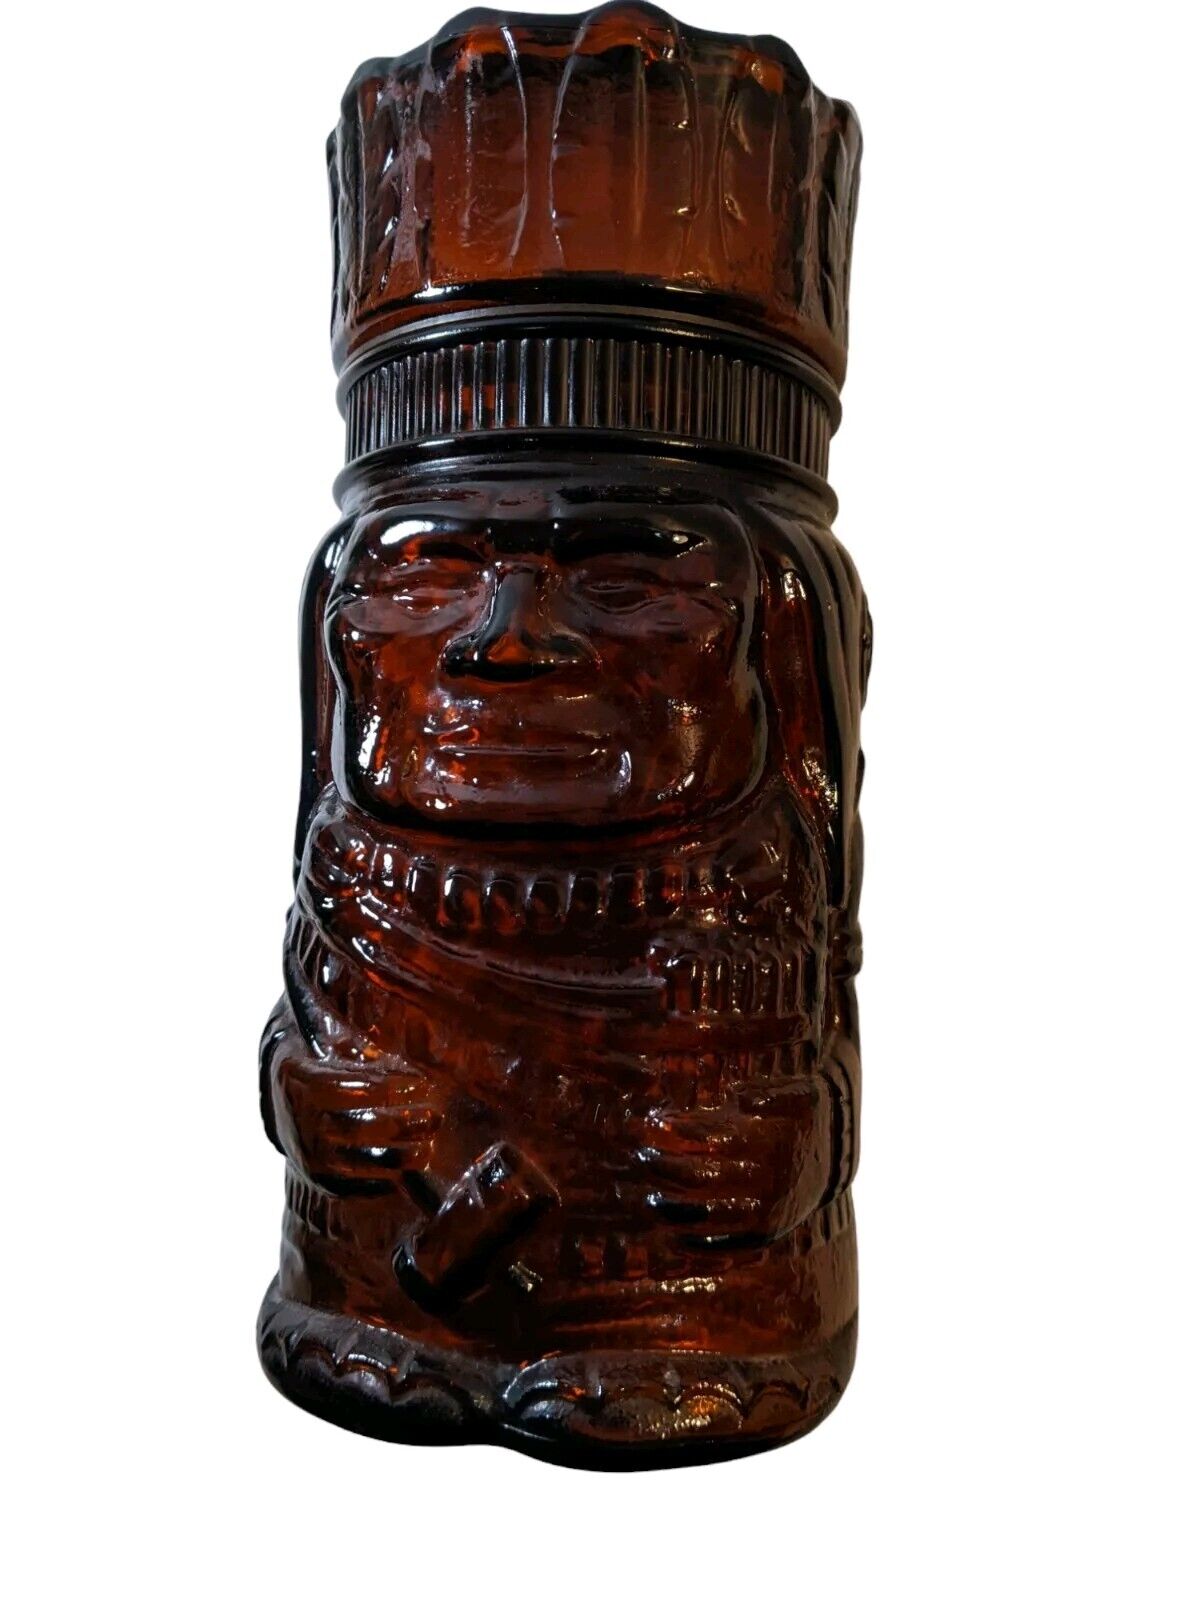 Native American Chief Brown Amber Glass Tobacco Jar Canister Humidor Pipe Cigars